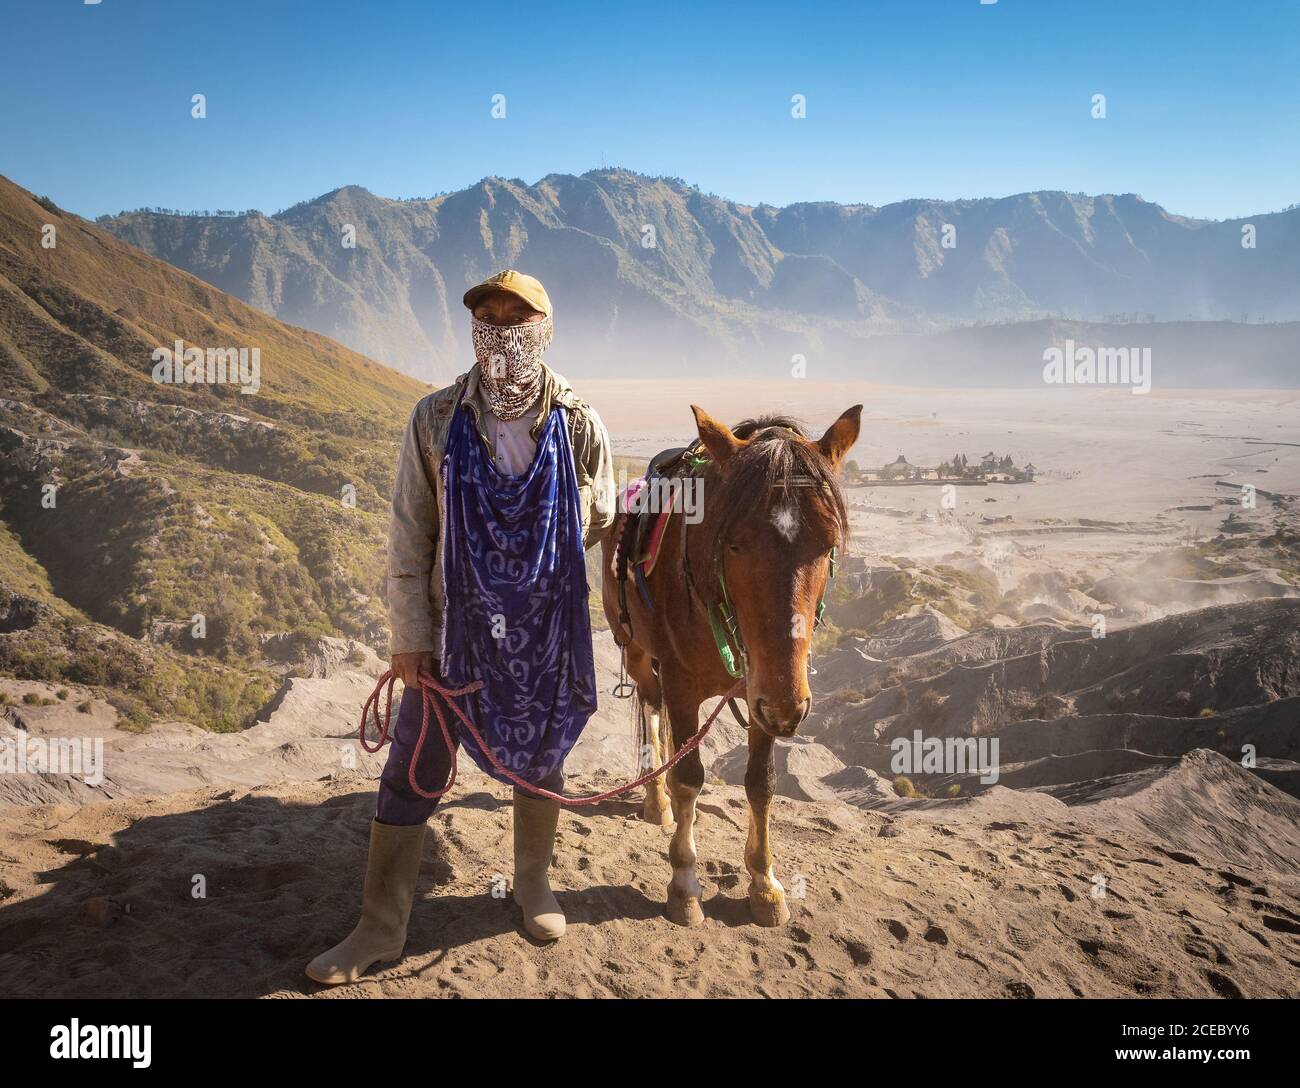 Java Island, Indonesia - August, 14 2015: Ethnic person with scarf on face looking at camera while standing near lovely horse not far from Mount Bromo on sunny day Stock Photo